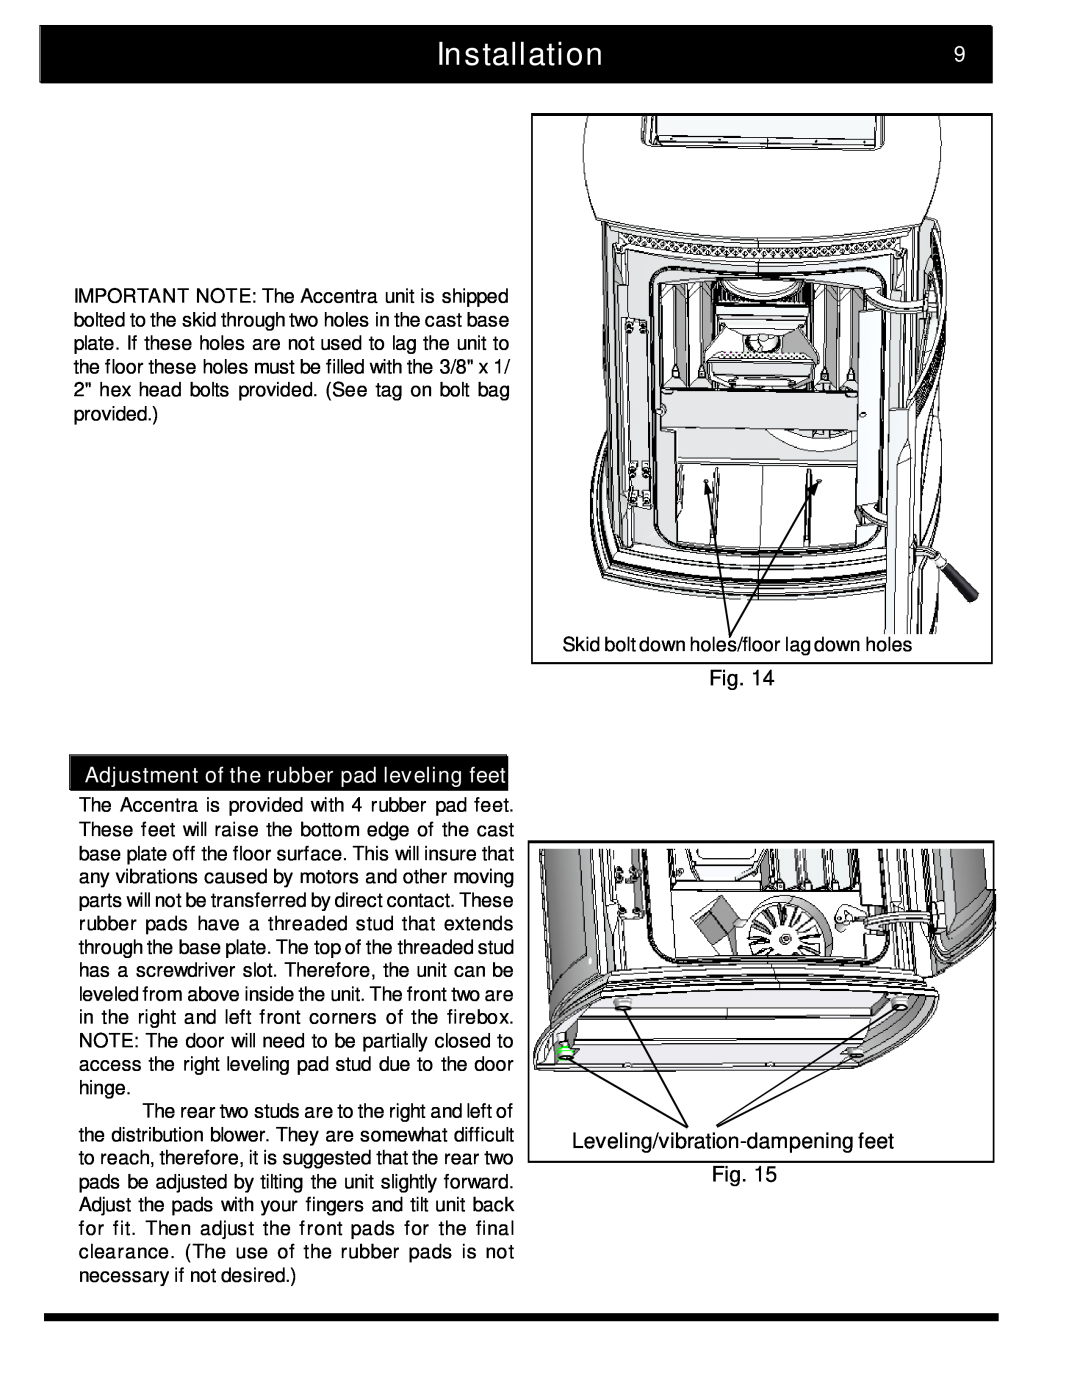 Harman Stove Company 2 manual Installation9, Adjustment of the rubber pad leveling feet 